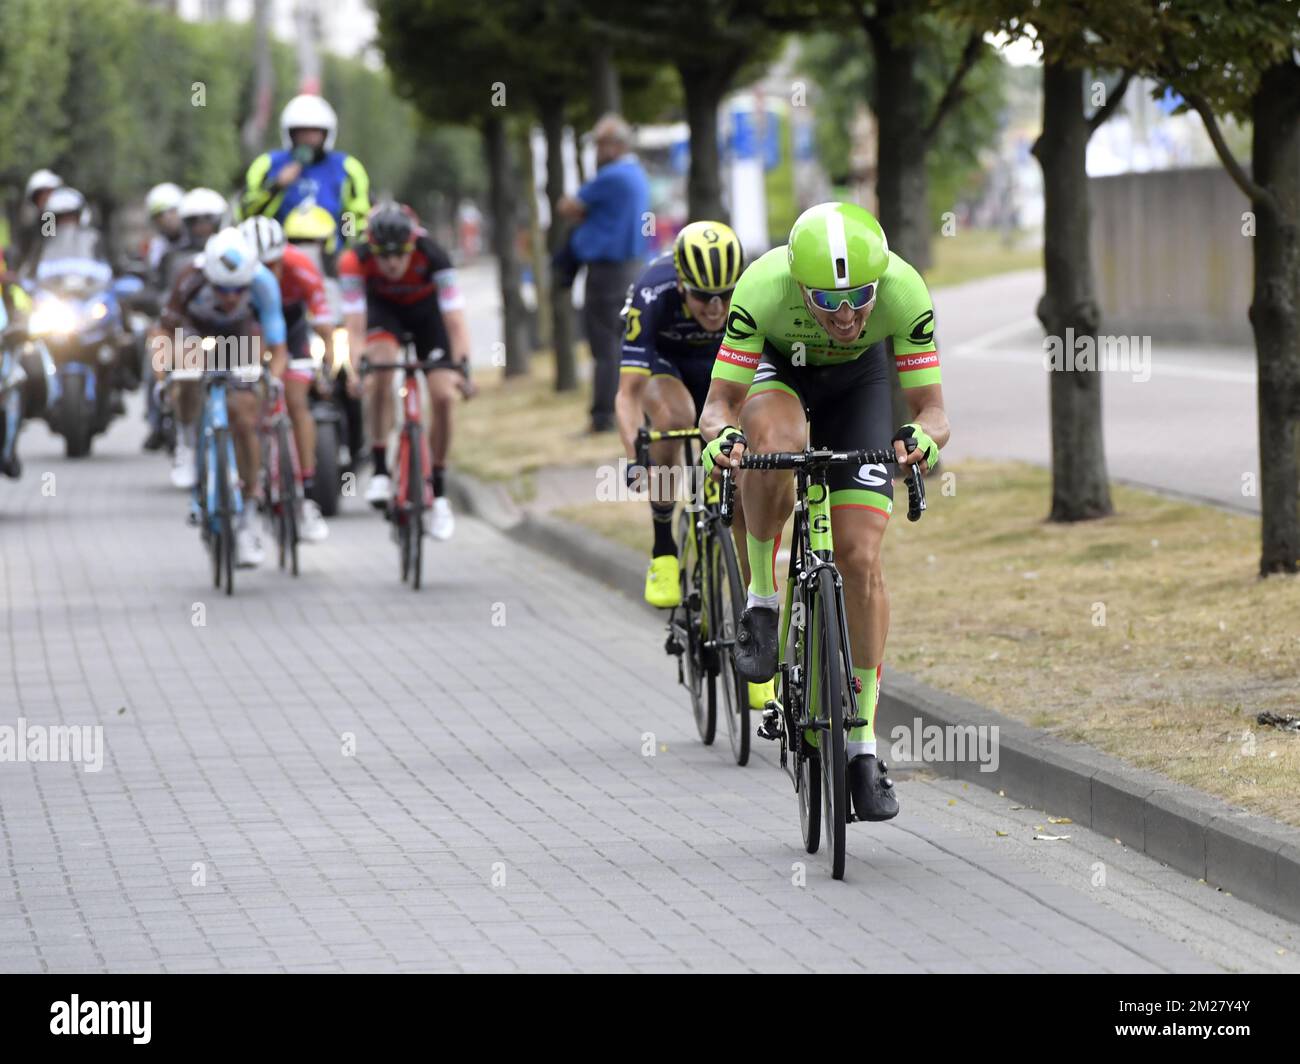 Belgian Sep Vanmarcke of Cannondale Drapac Pro Cycling Team pictured in action during the men's elite race at the Belgian cycling championships, Sunday 25 June 2017, in Antwerp. BELGA PHOTO POOL PETER DE VOECHT  Stock Photo